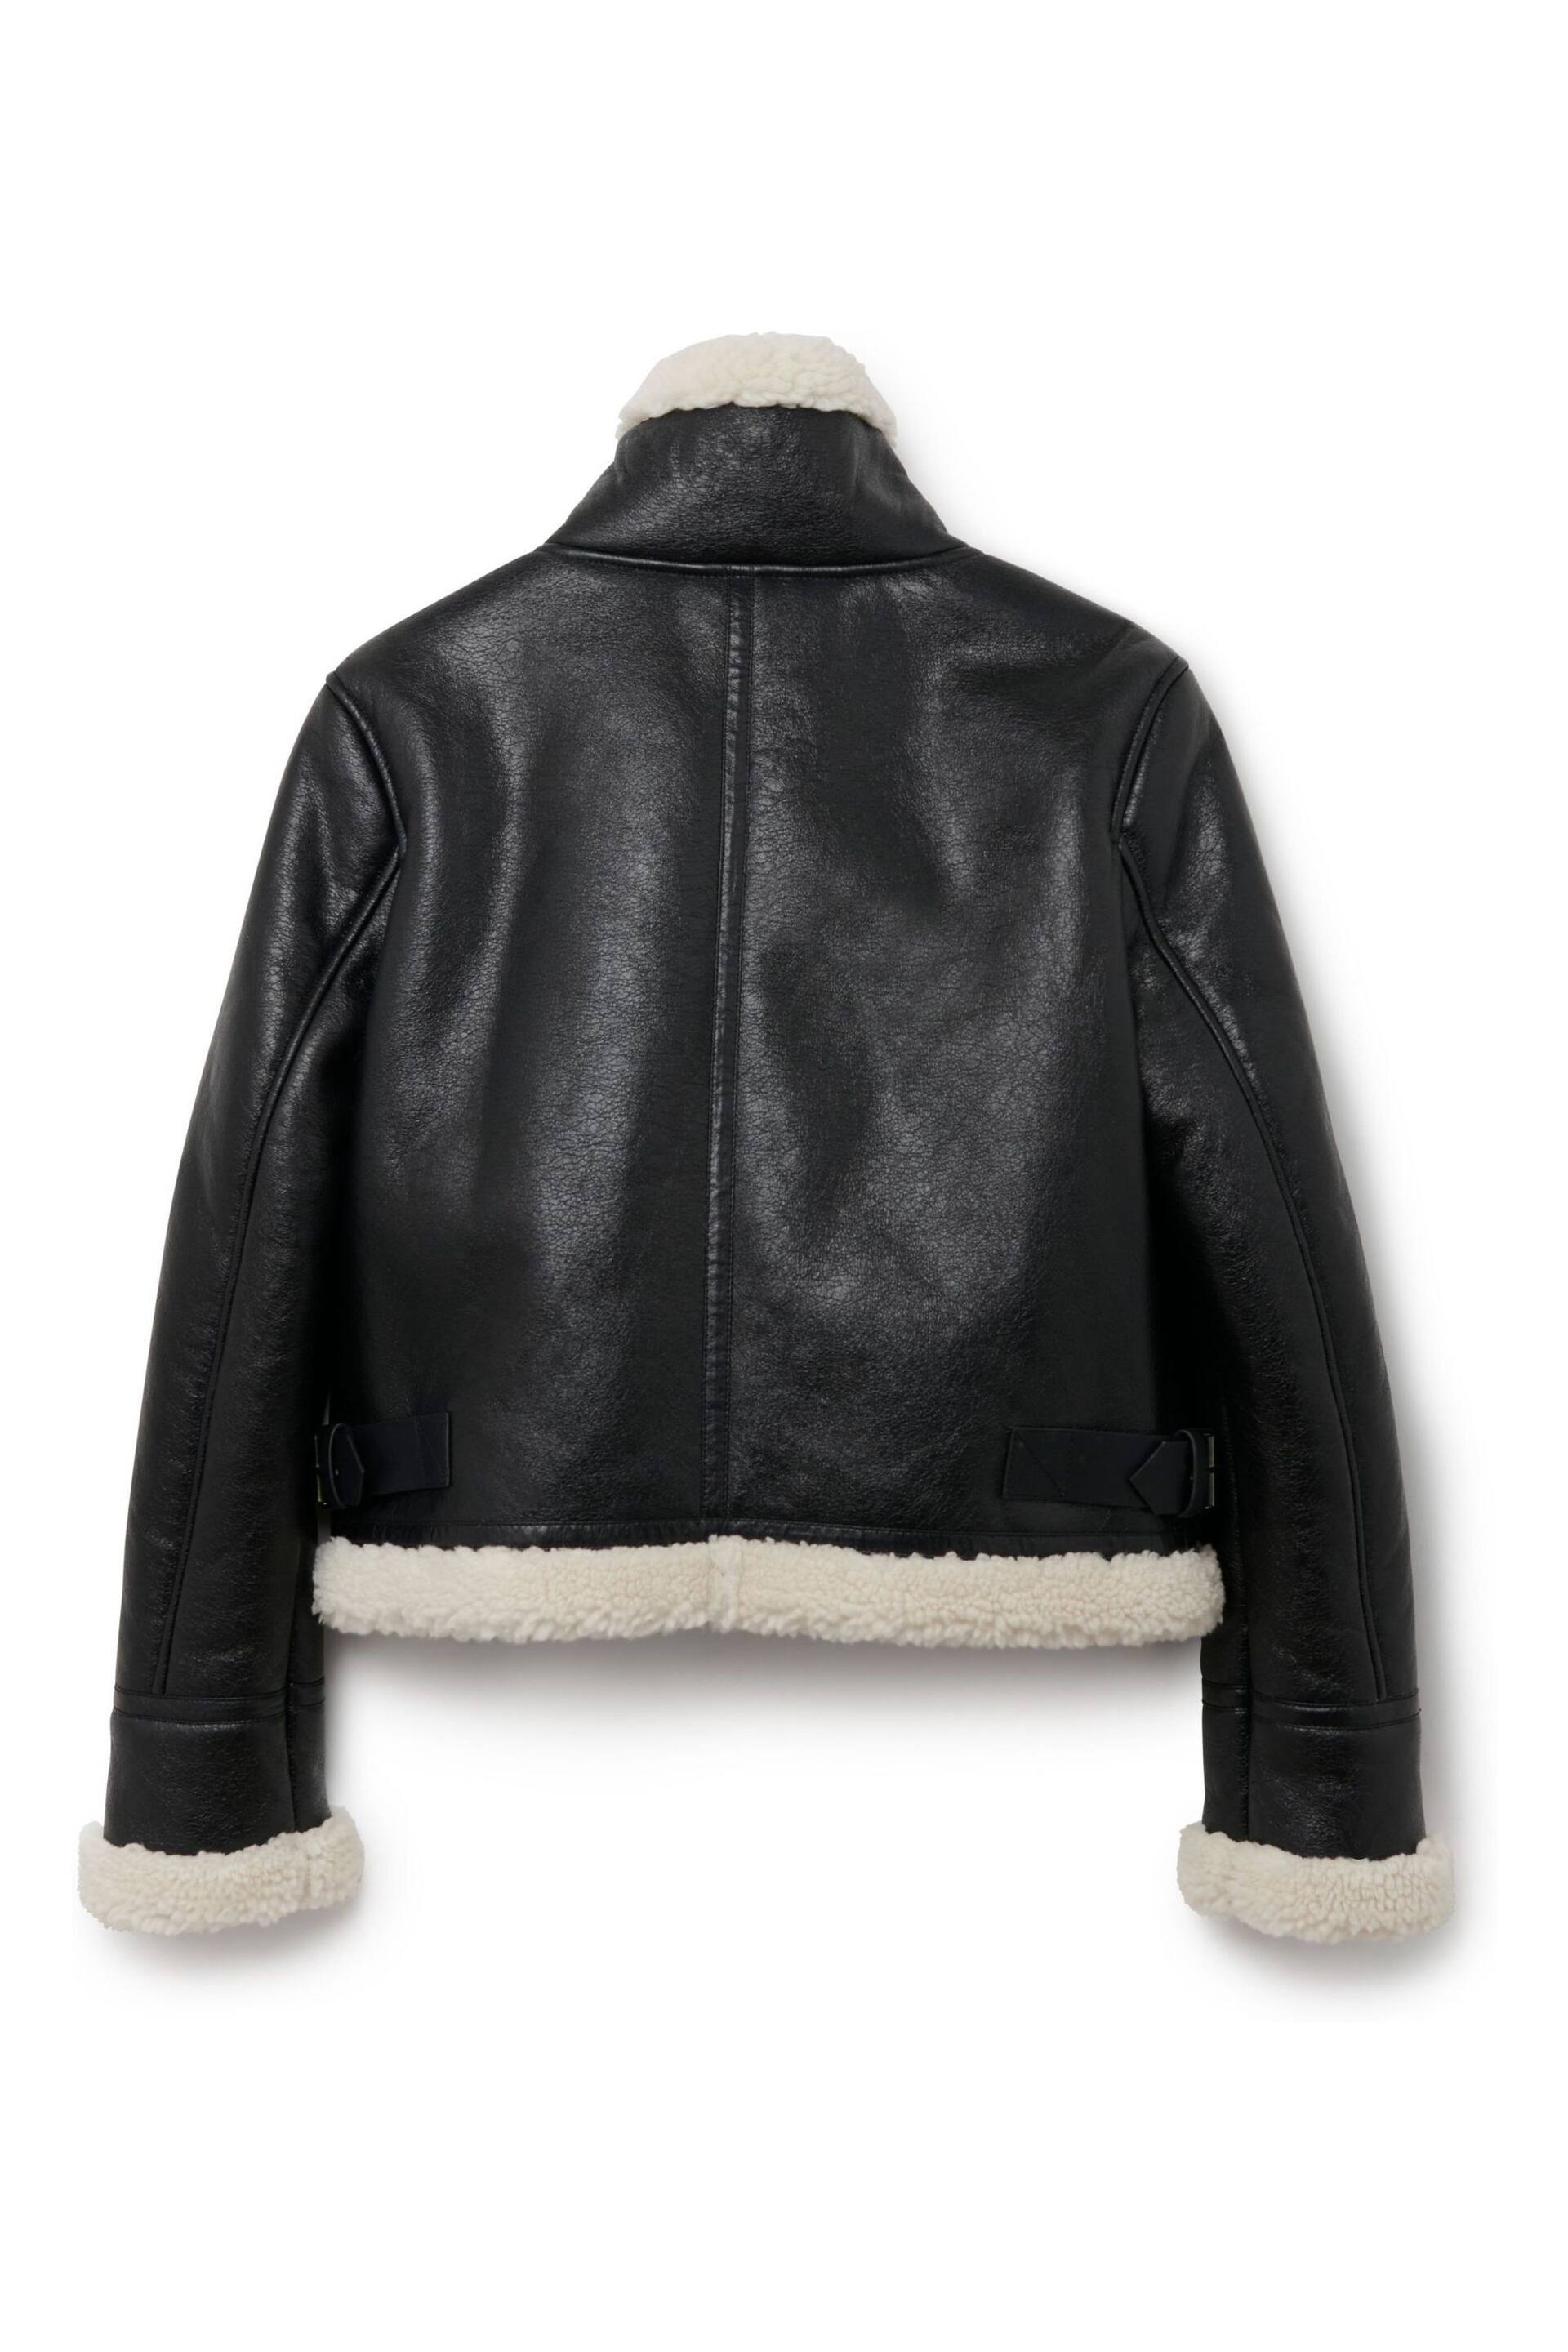 Another Sunday Bonded Aviator Jacket With Faux Fur Lining In Black - Image 5 of 6